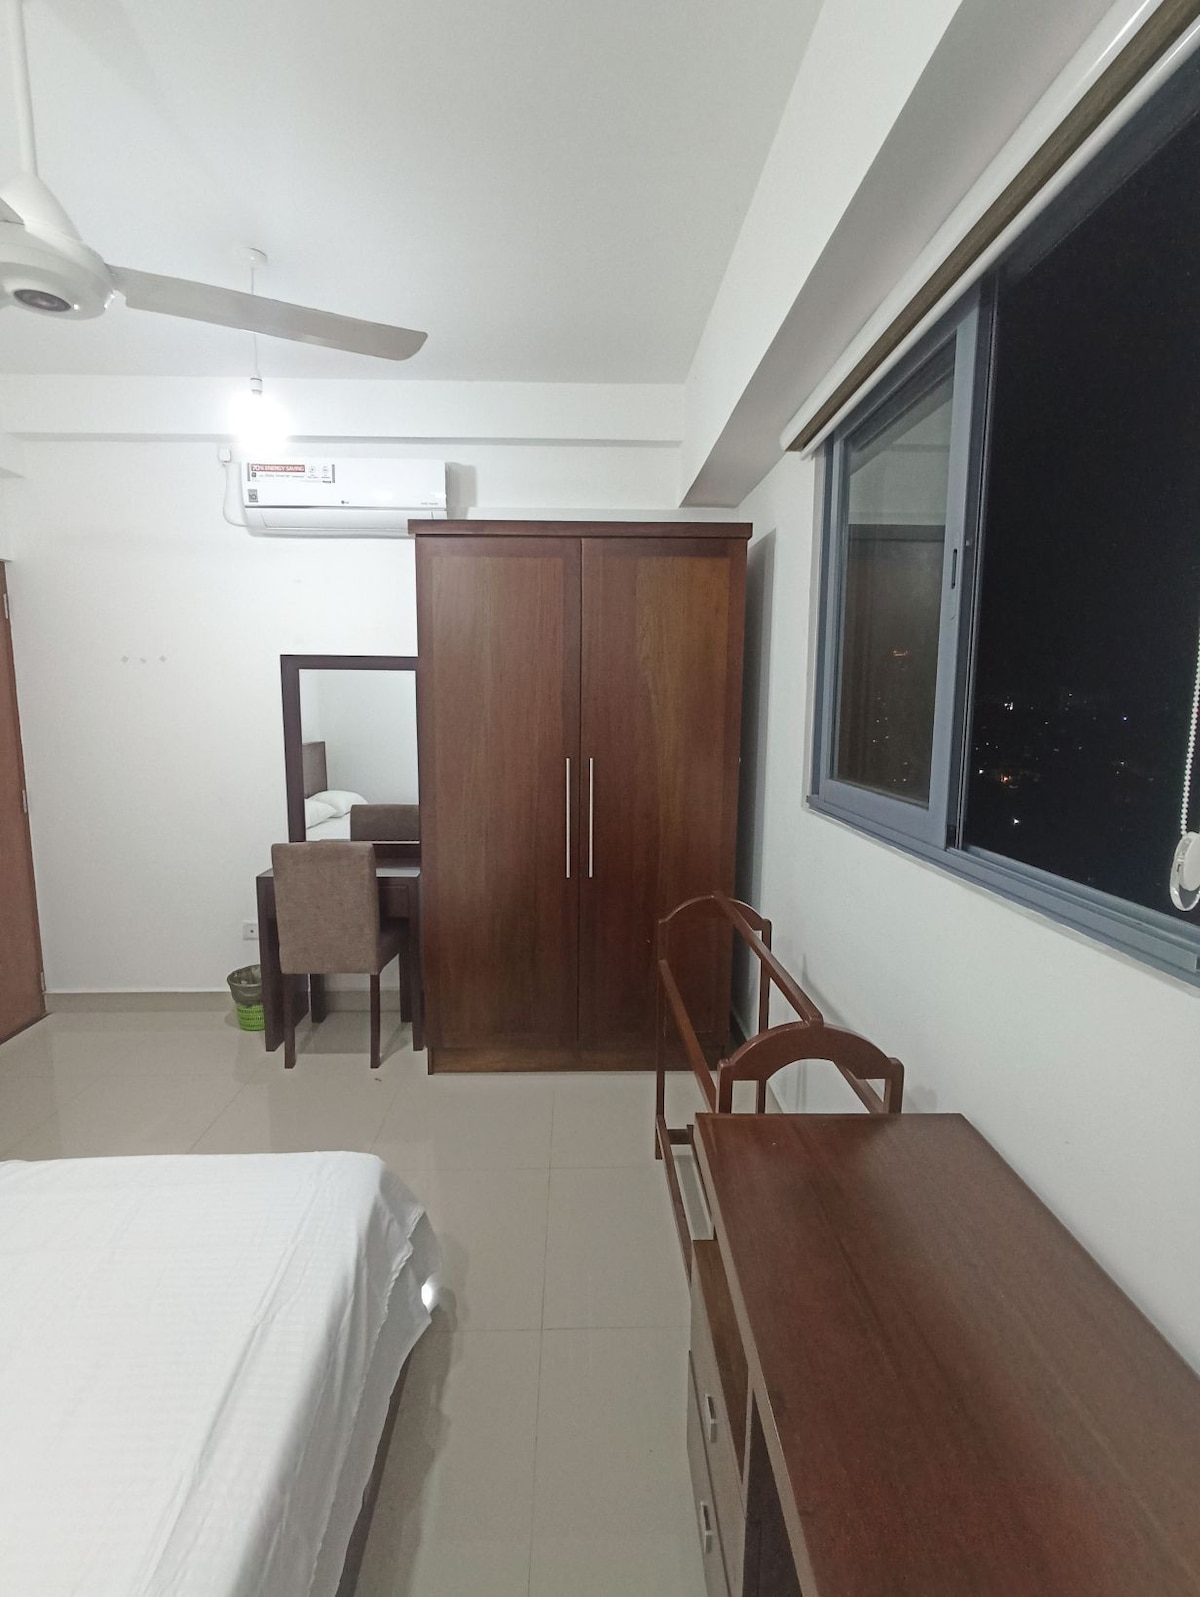 A Room for Rent in Borella, Colombo 08